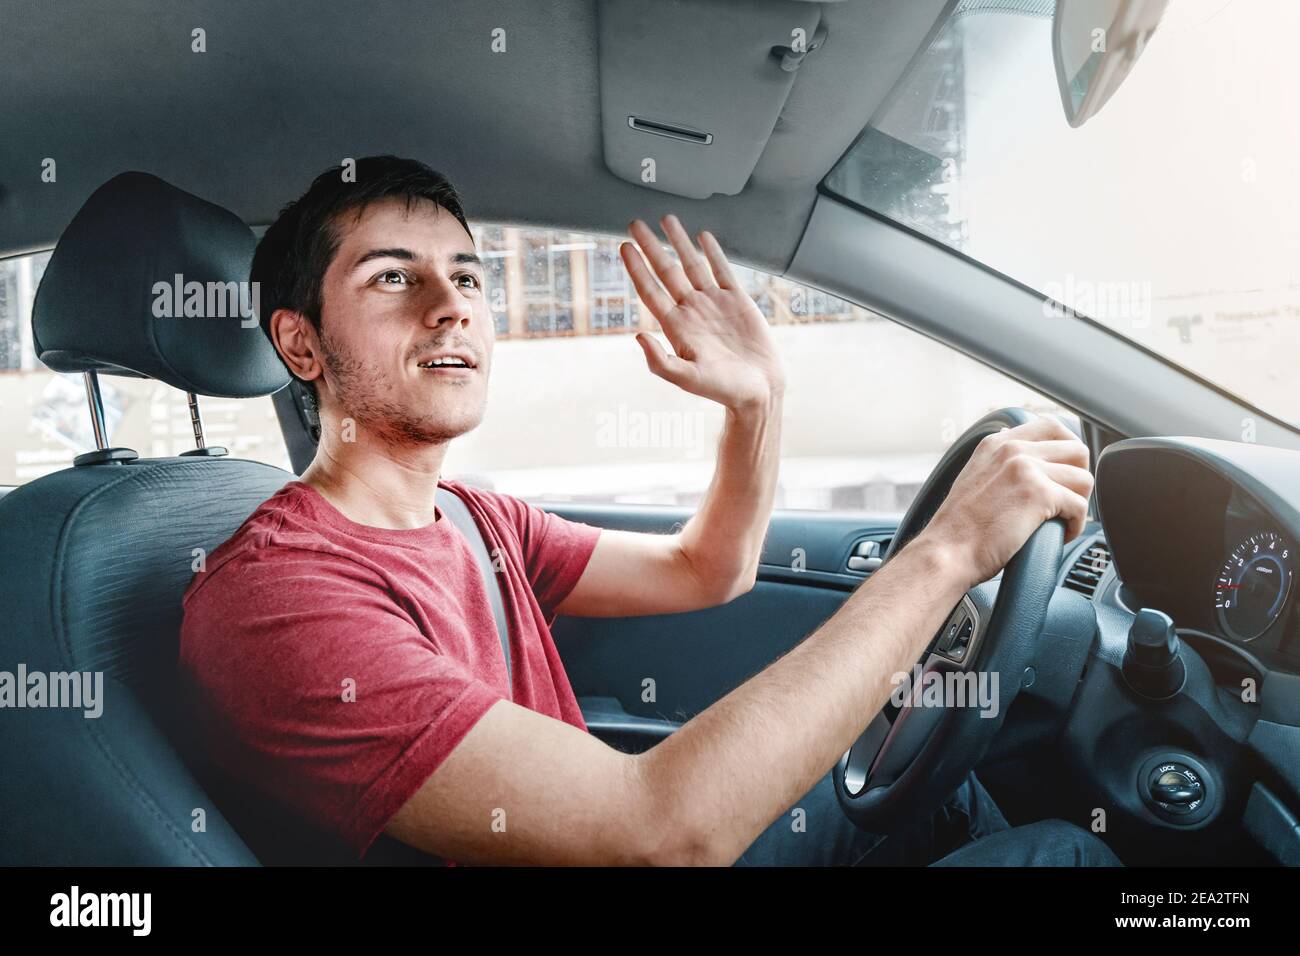 Joyful and careless car driver raises his hand in thanks for giving way. Traffic rules and politeness concept Stock Photo